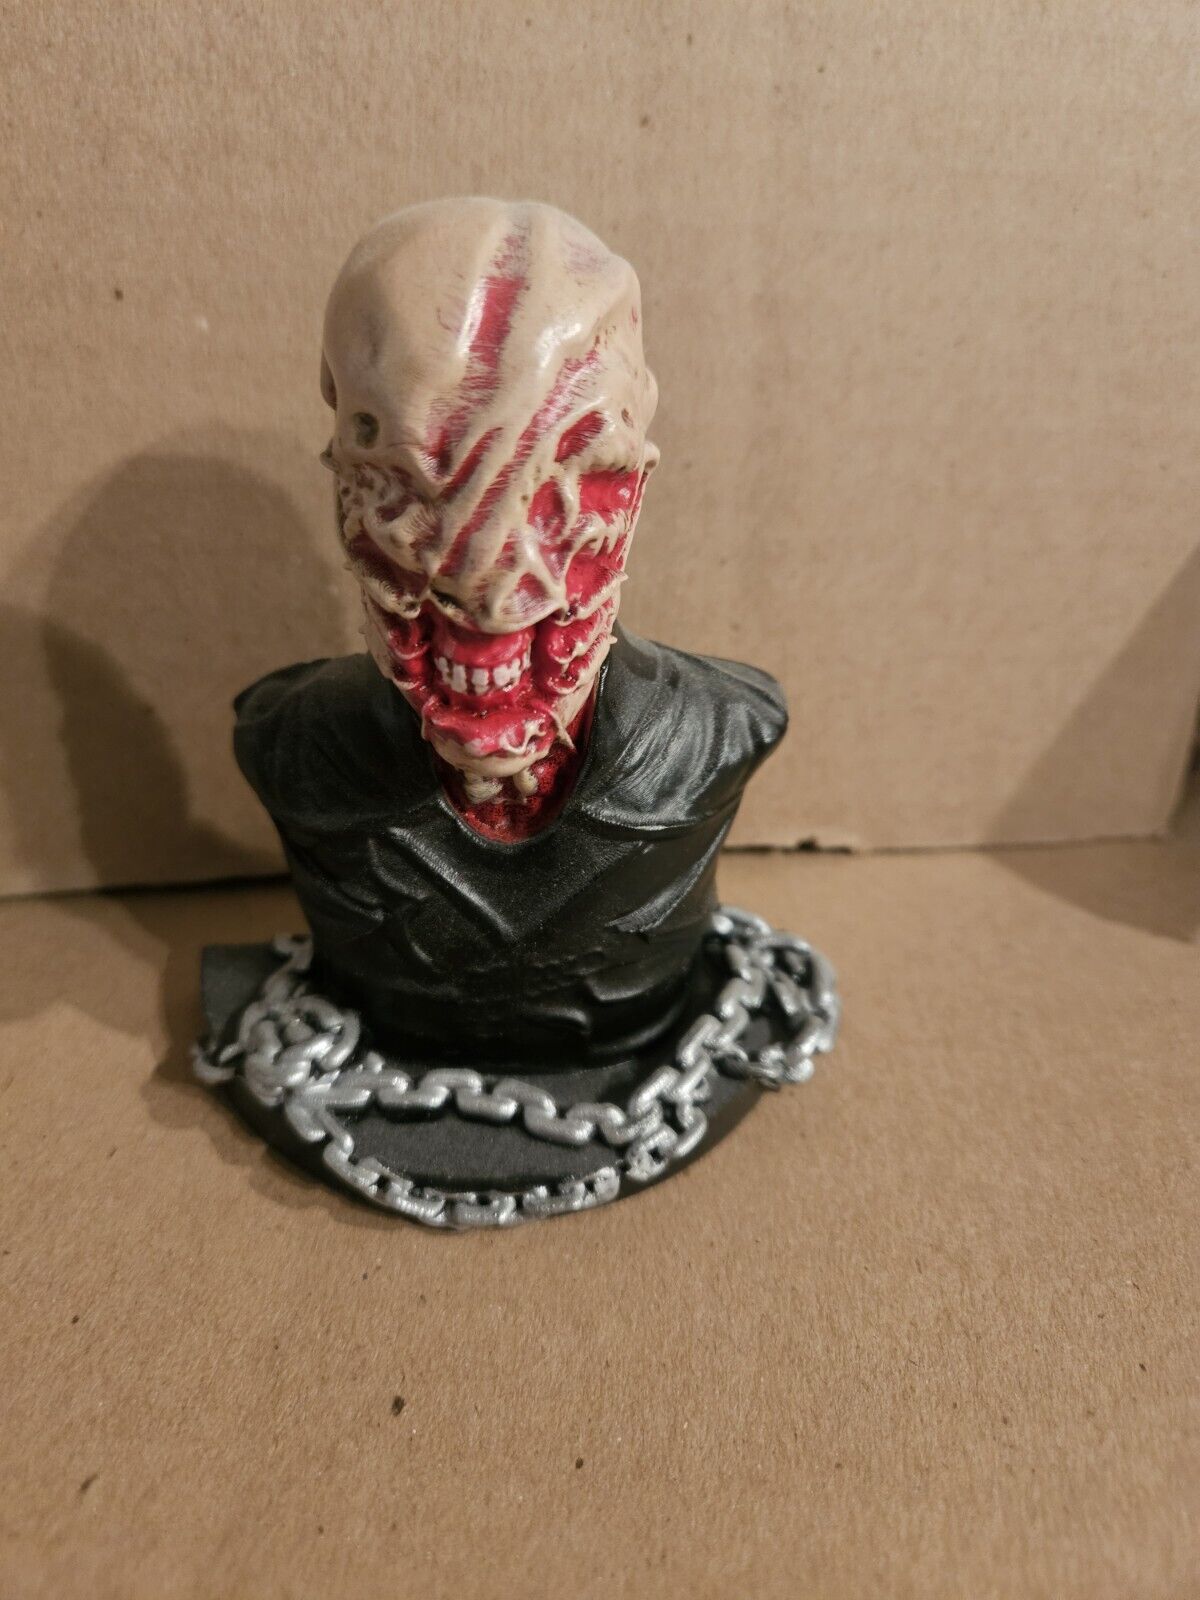  Hellraiser  Chatterer Bust Figure Fright Crate Exclusive 